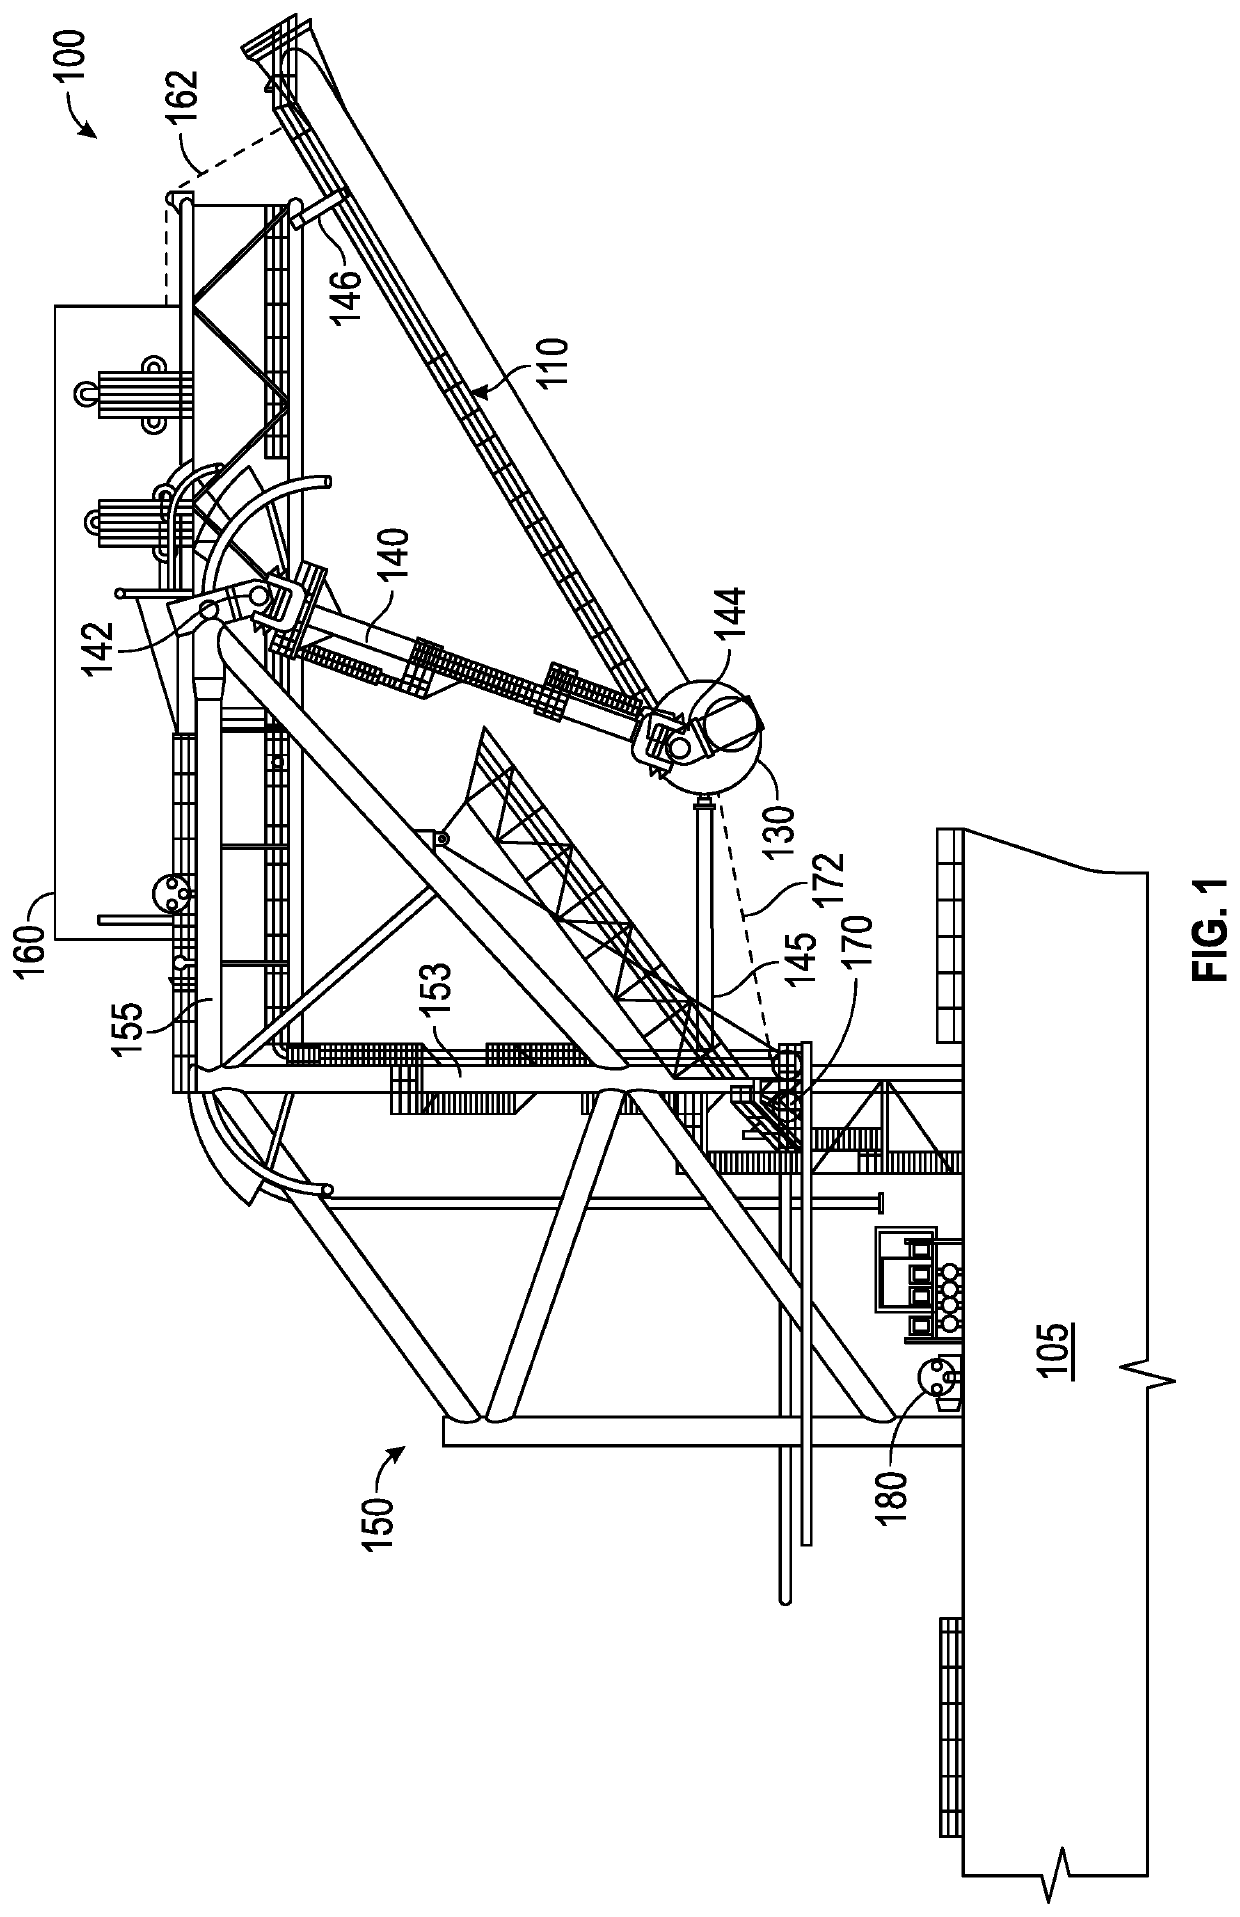 Disconnectable tower yoke mooring system and methods for using same